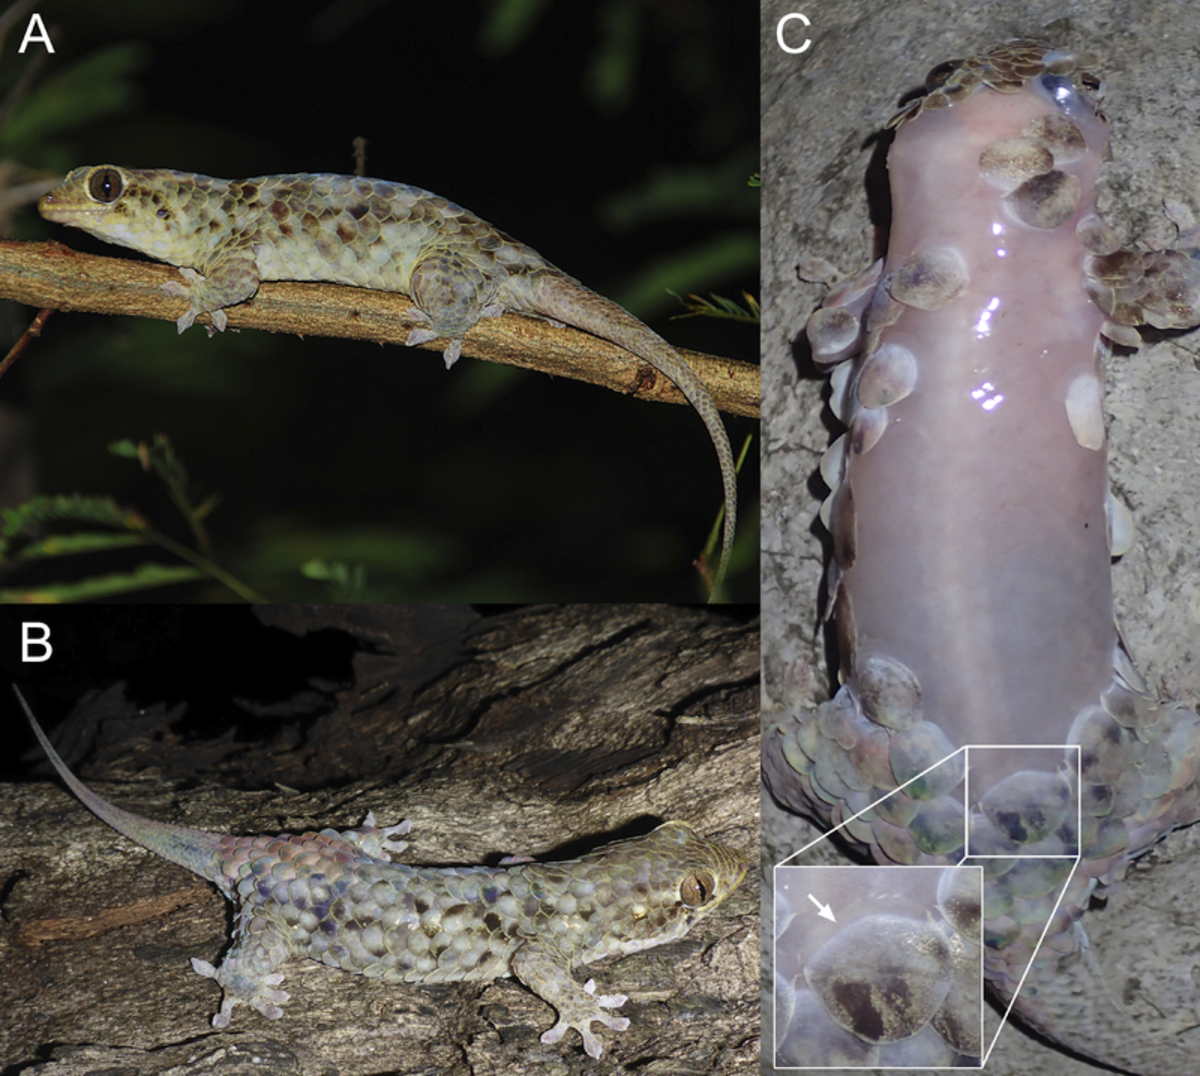 A and B are two specimens before they shed their skin. C shows a gecko afterward.